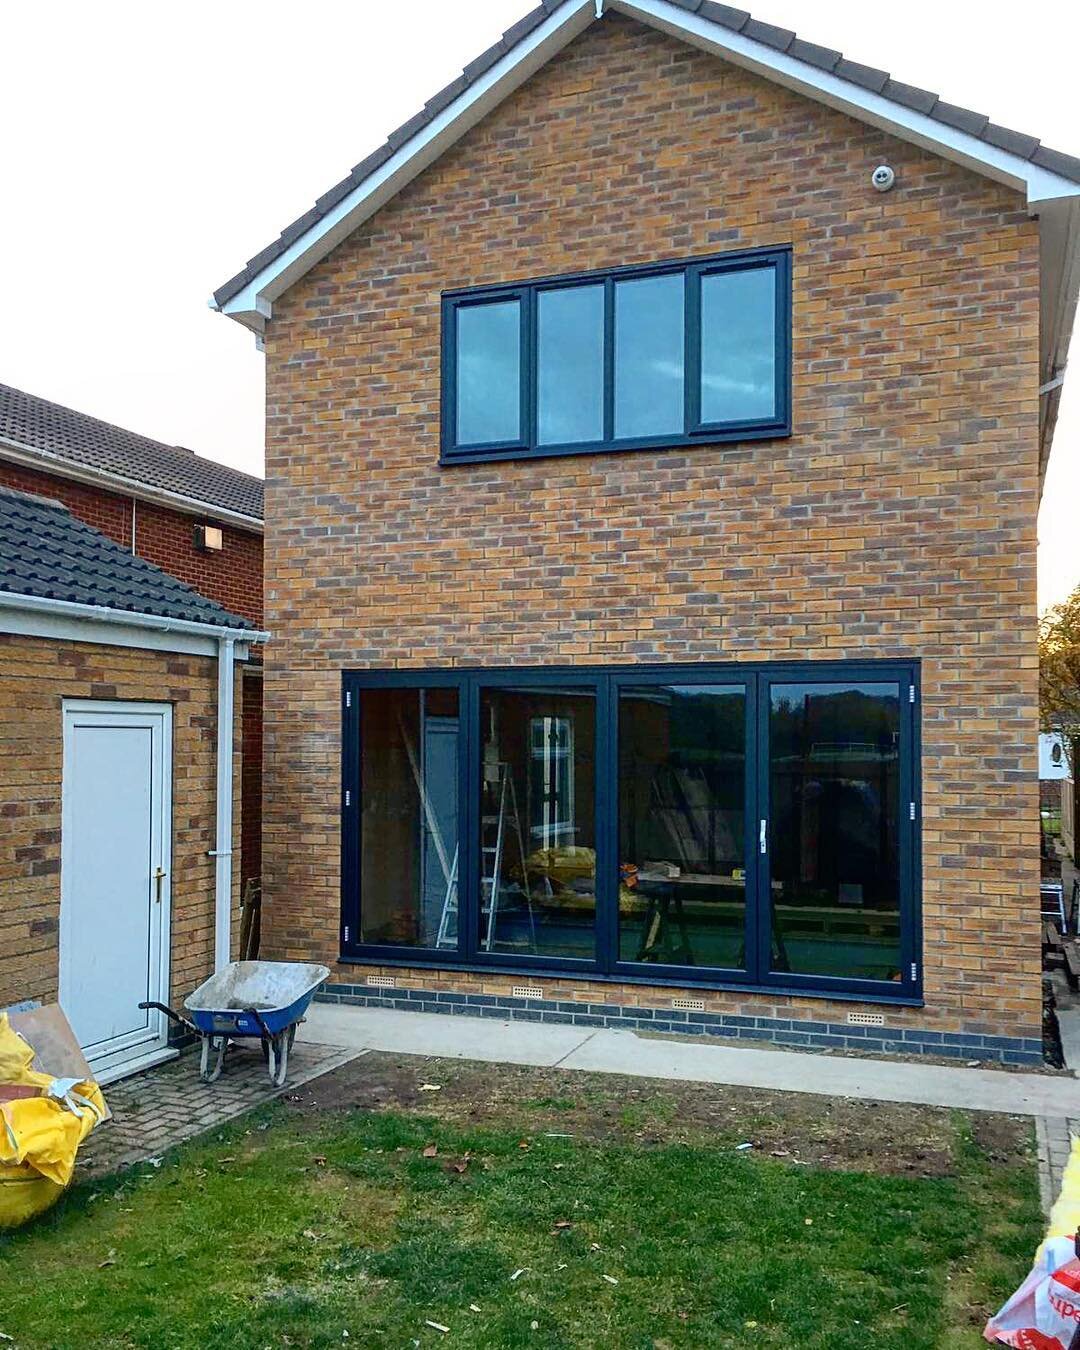 Two storey house extension done, dusted and looking fantastic #construction #residentialconstruction #structural #engineering #houseextension #glazing #bifolddoors #building